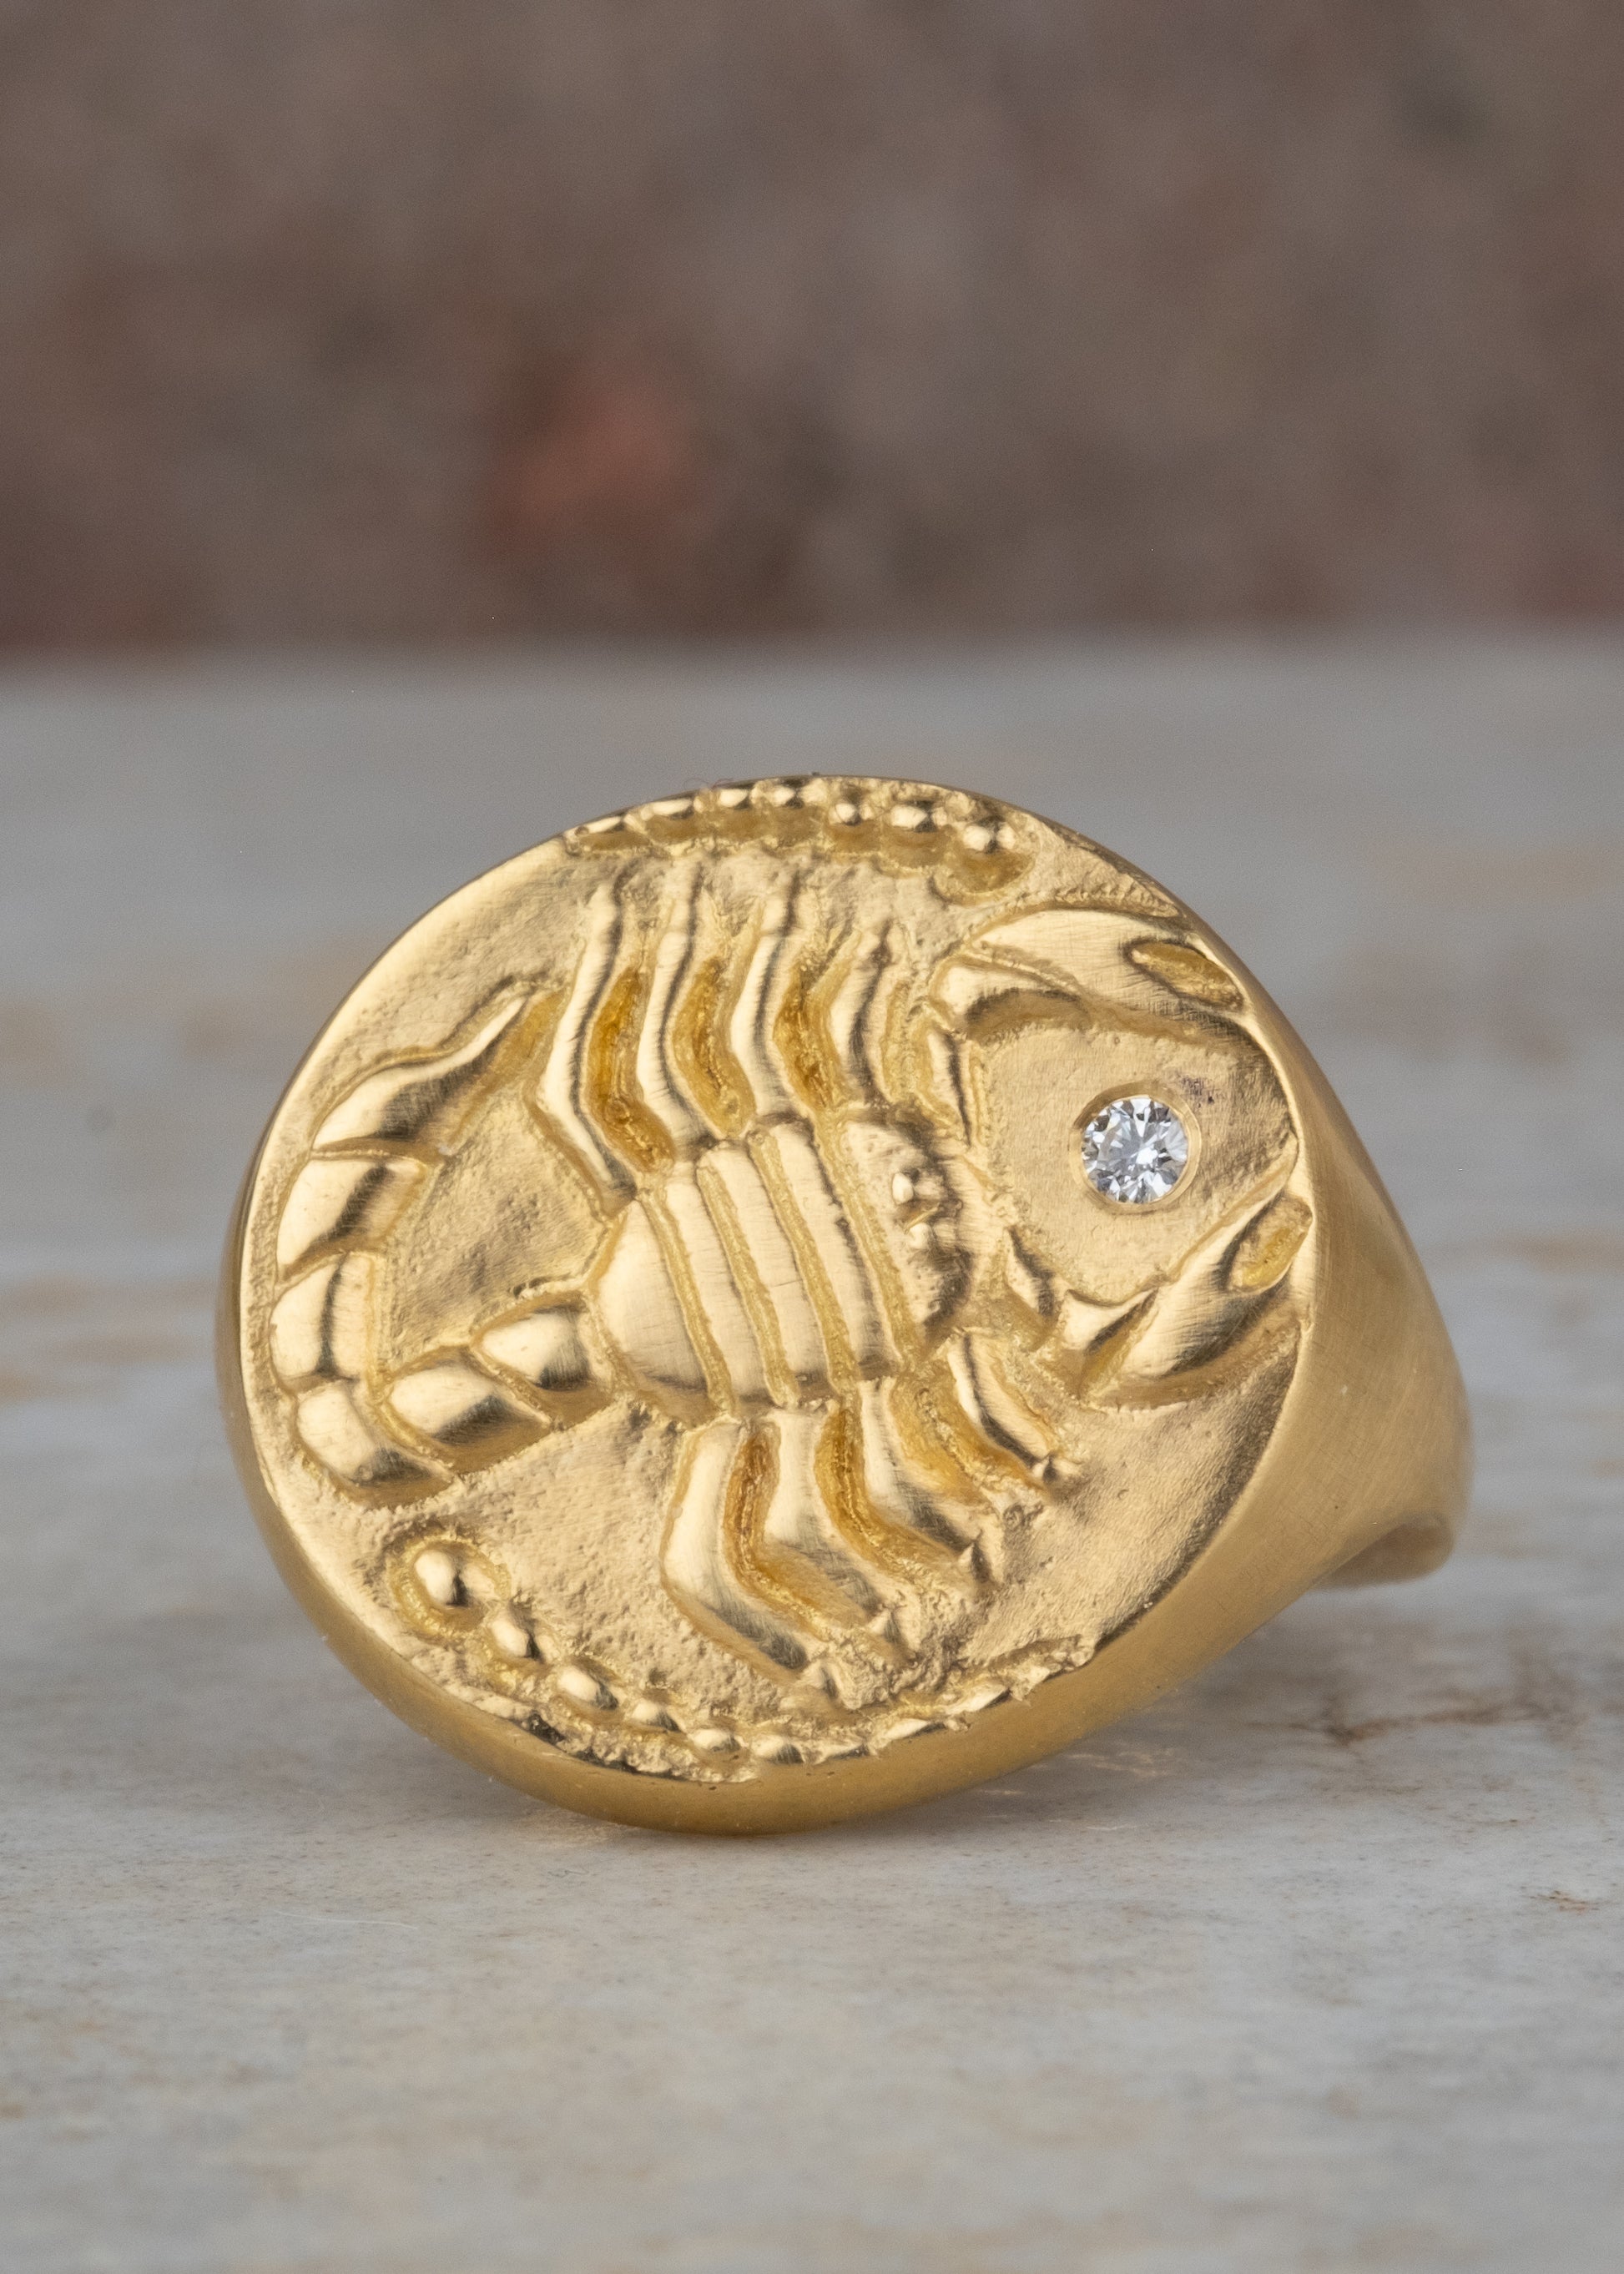 The eighth sign of the Zodiac, water sign Scorpio is a passionate truth-seeker who leads with decisiveness. A hand-detailed, fierce yet whimsical scorpion is accented with a precious diamond for a ring that captures the power of the celestial sky.